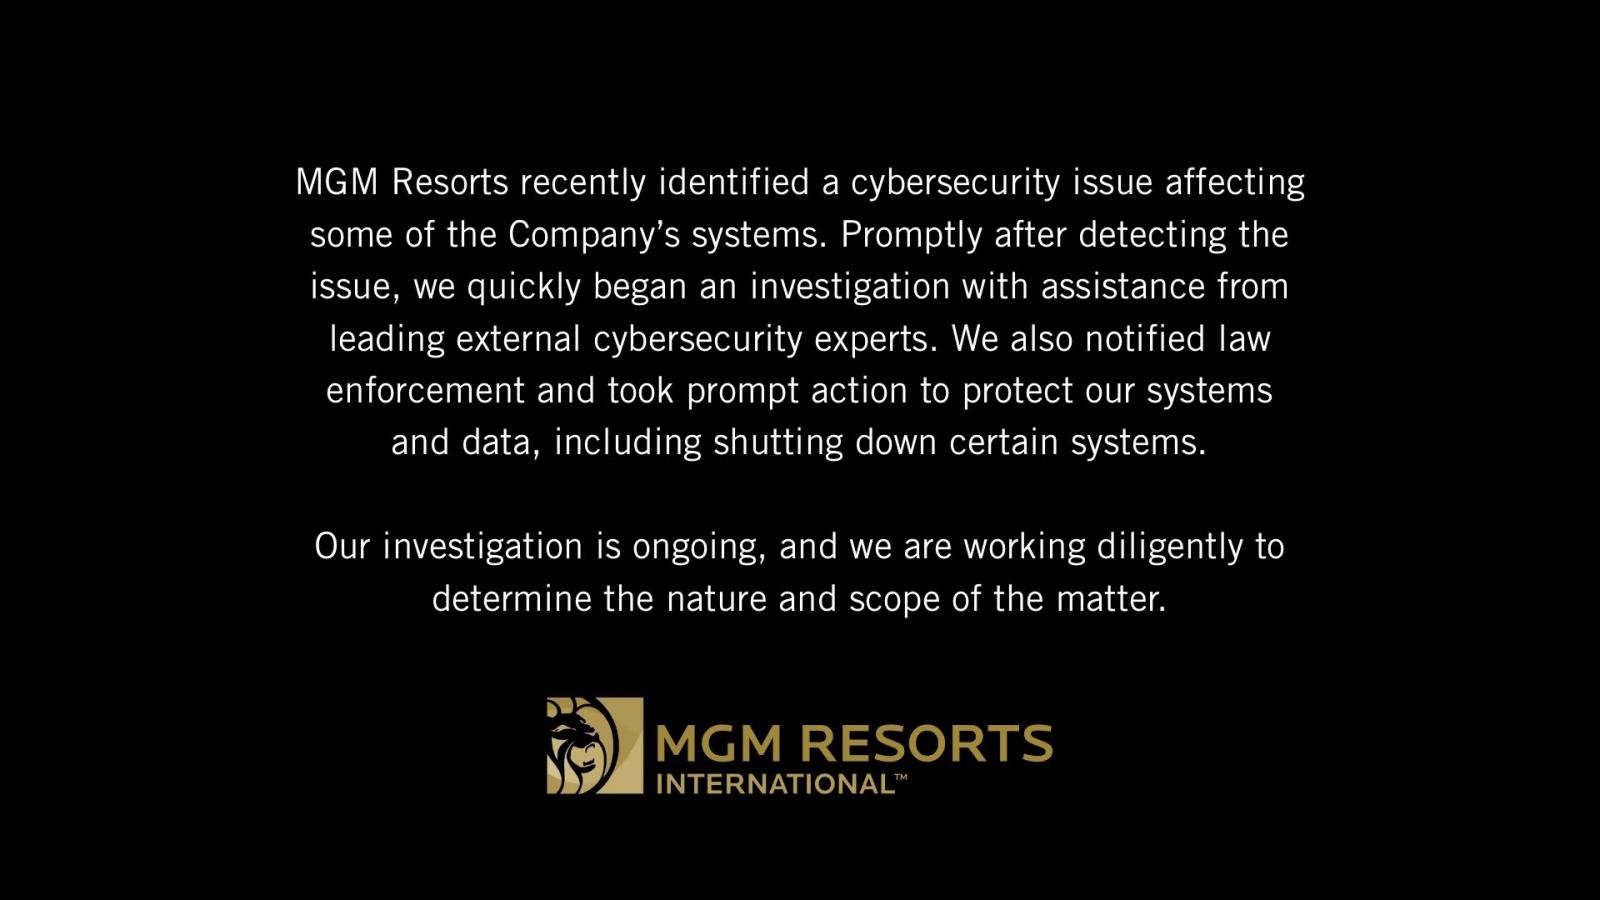 MGM Resorts discloses cybersecurity issue